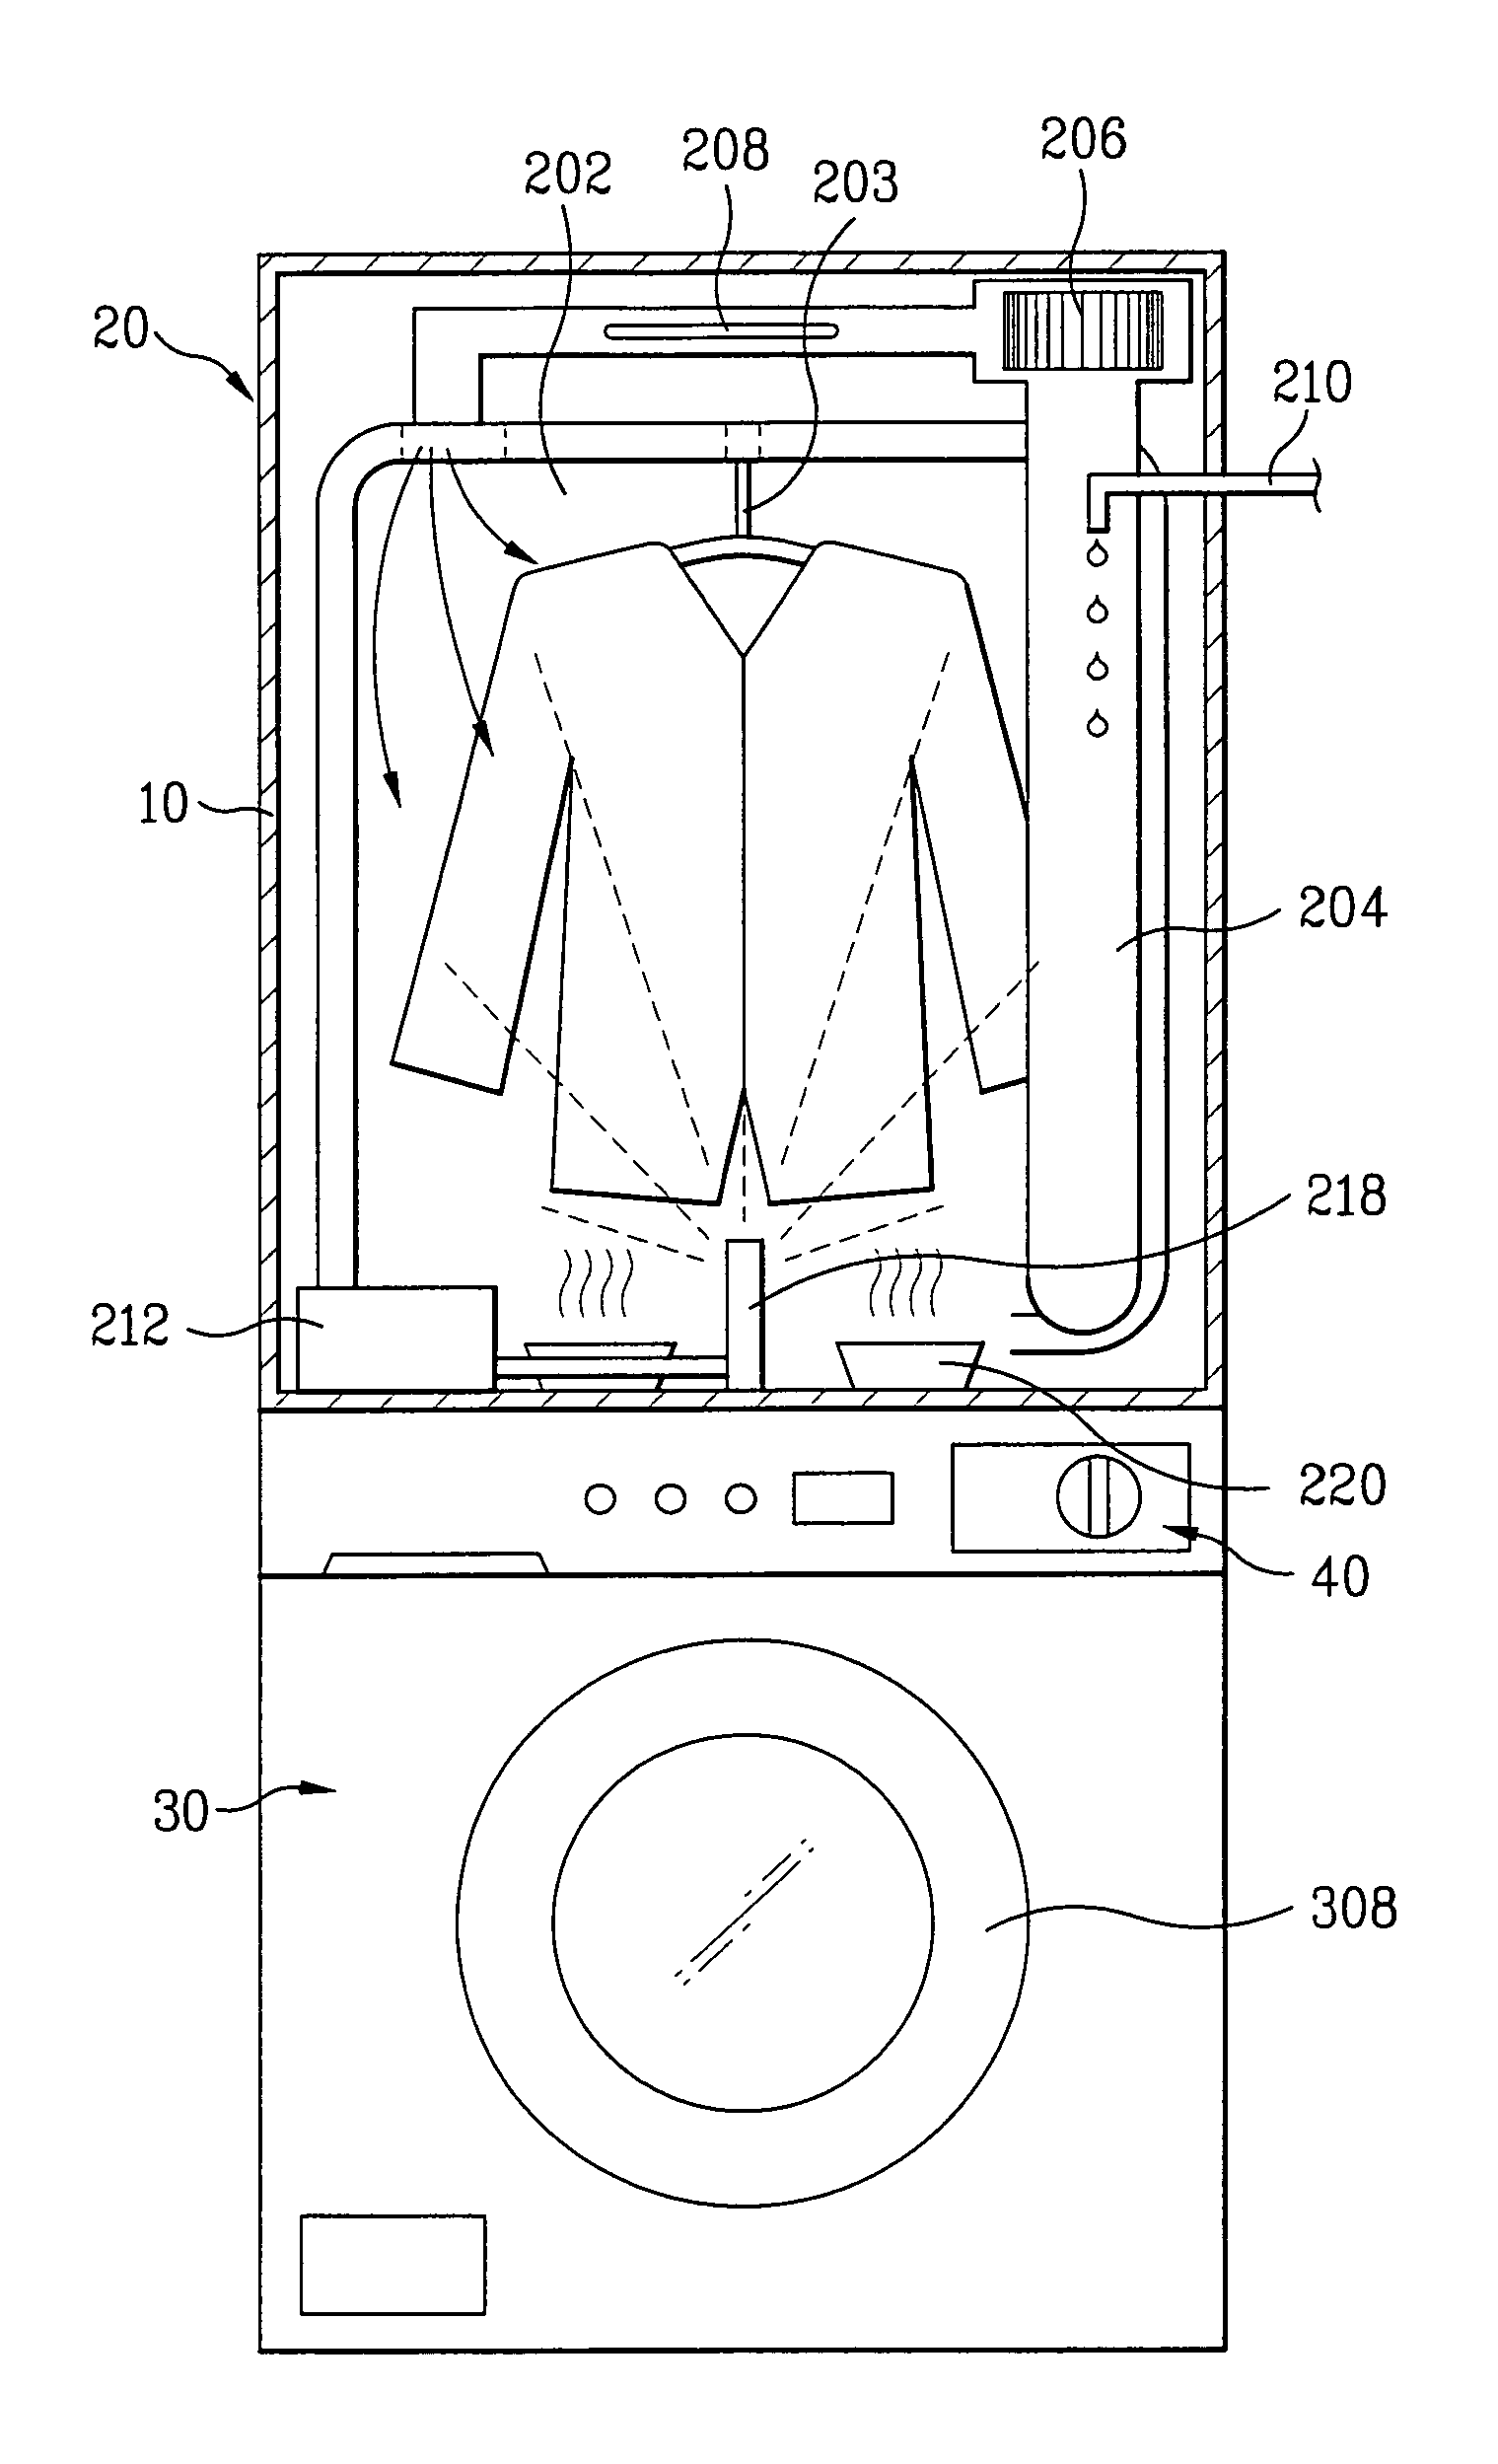 Multi-functional laundry device and controlling method for the same